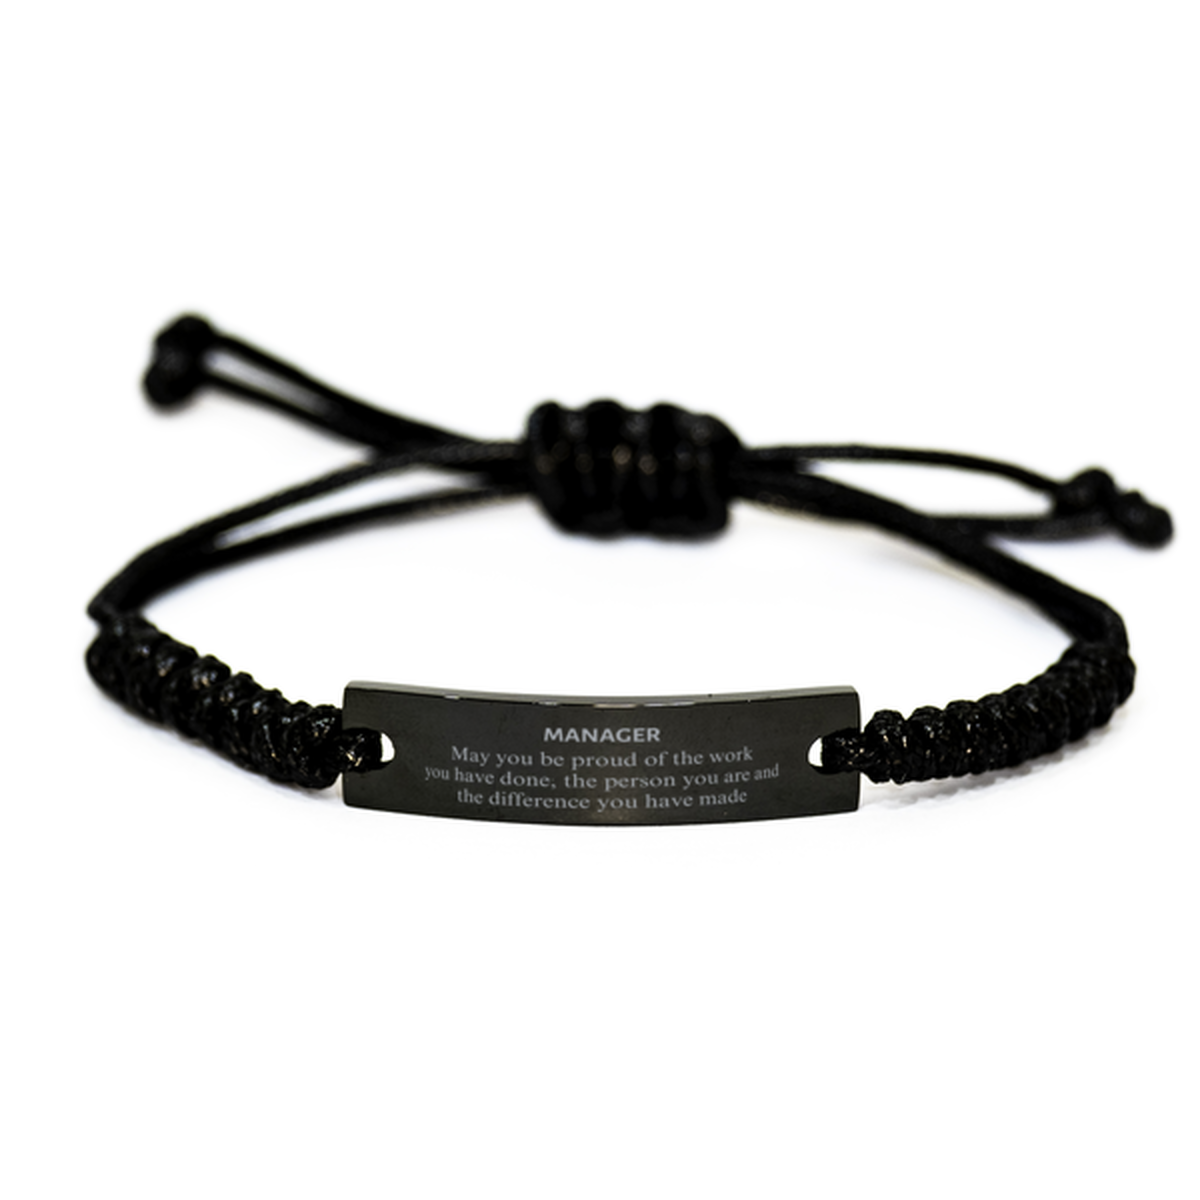 Manager May you be proud of the work you have done, Retirement Manager Black Rope Bracelet for Colleague Appreciation Gifts Amazing for Manager